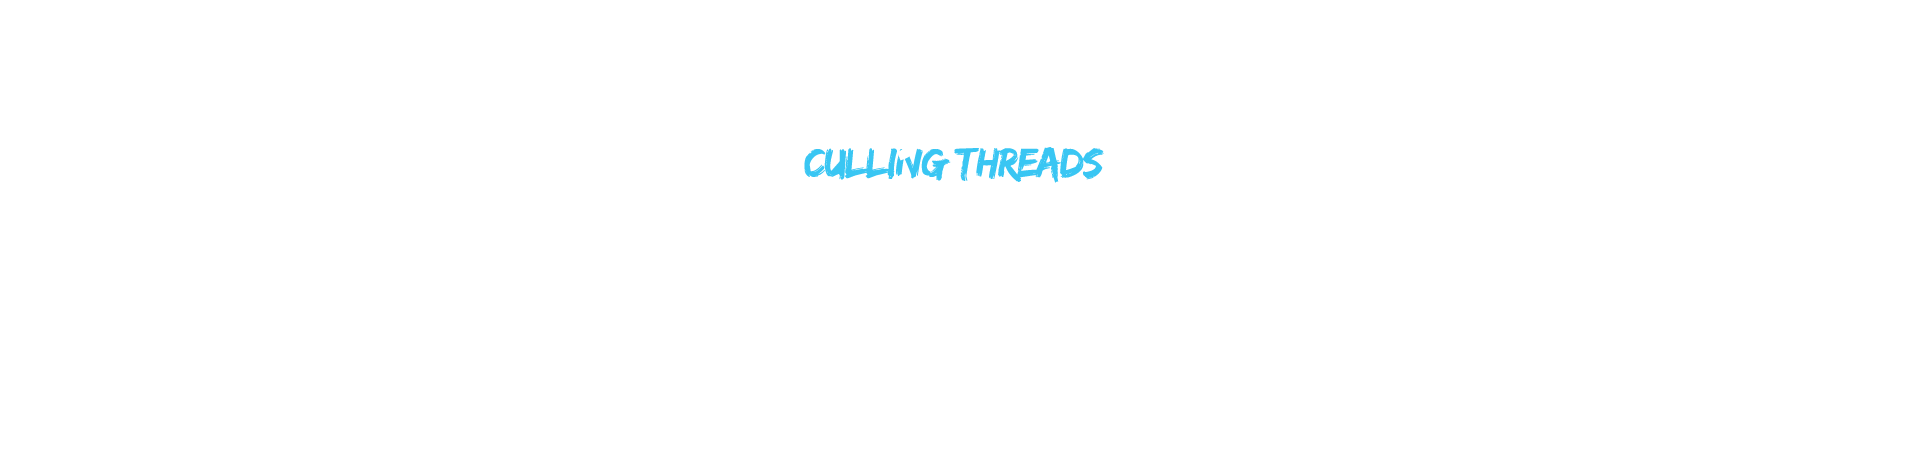 Logikcull-Team-Store-Page-Graphics-Header-Logo-Only-01